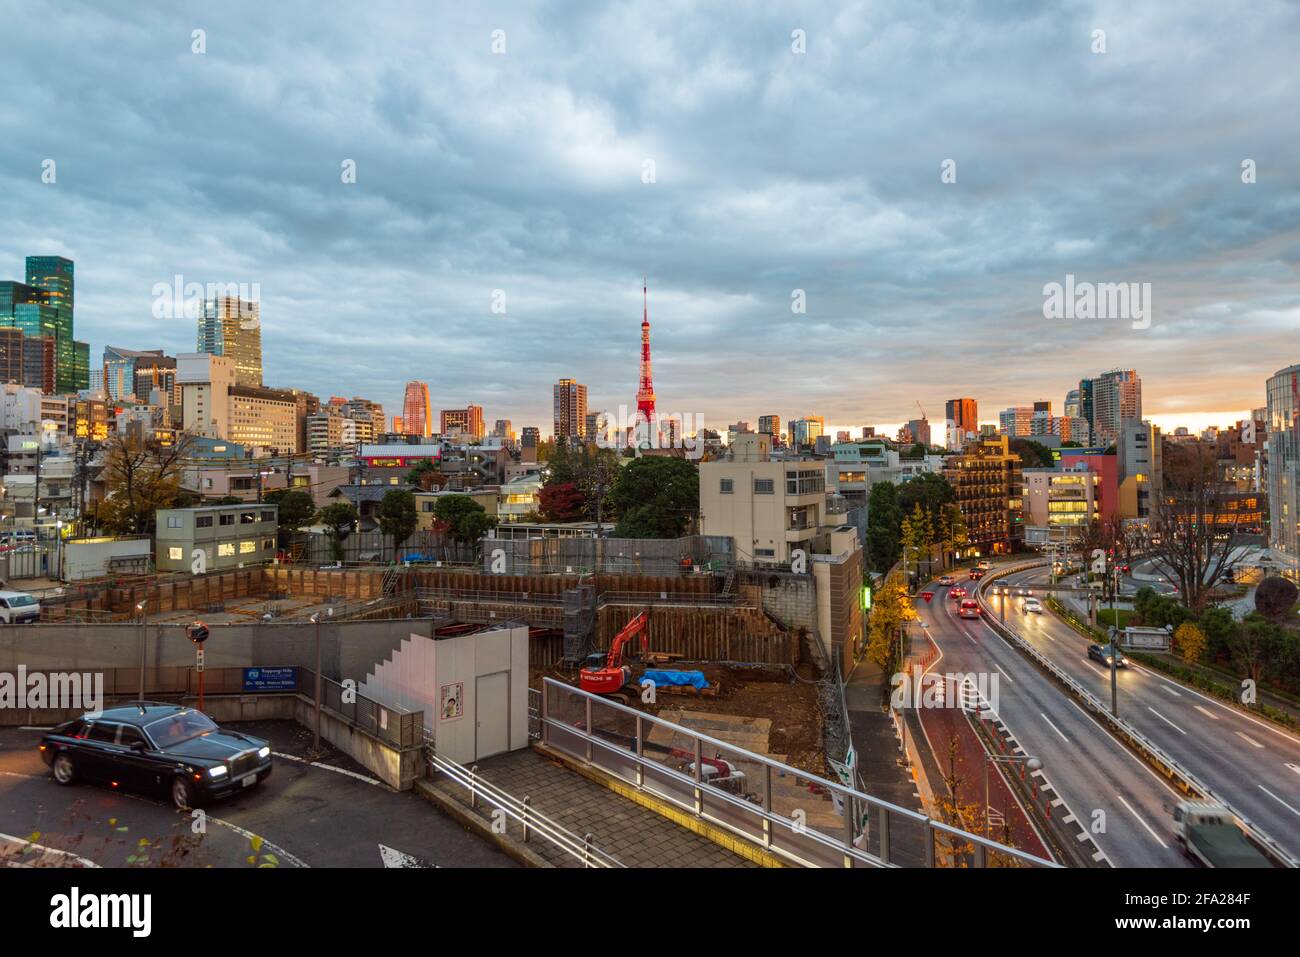 Tokyo, Japan - December 11, 2015: Elevated evening view of the city skyline and iconic Tokyo Tower, Tokyo, Japan, Asia Stock Photo